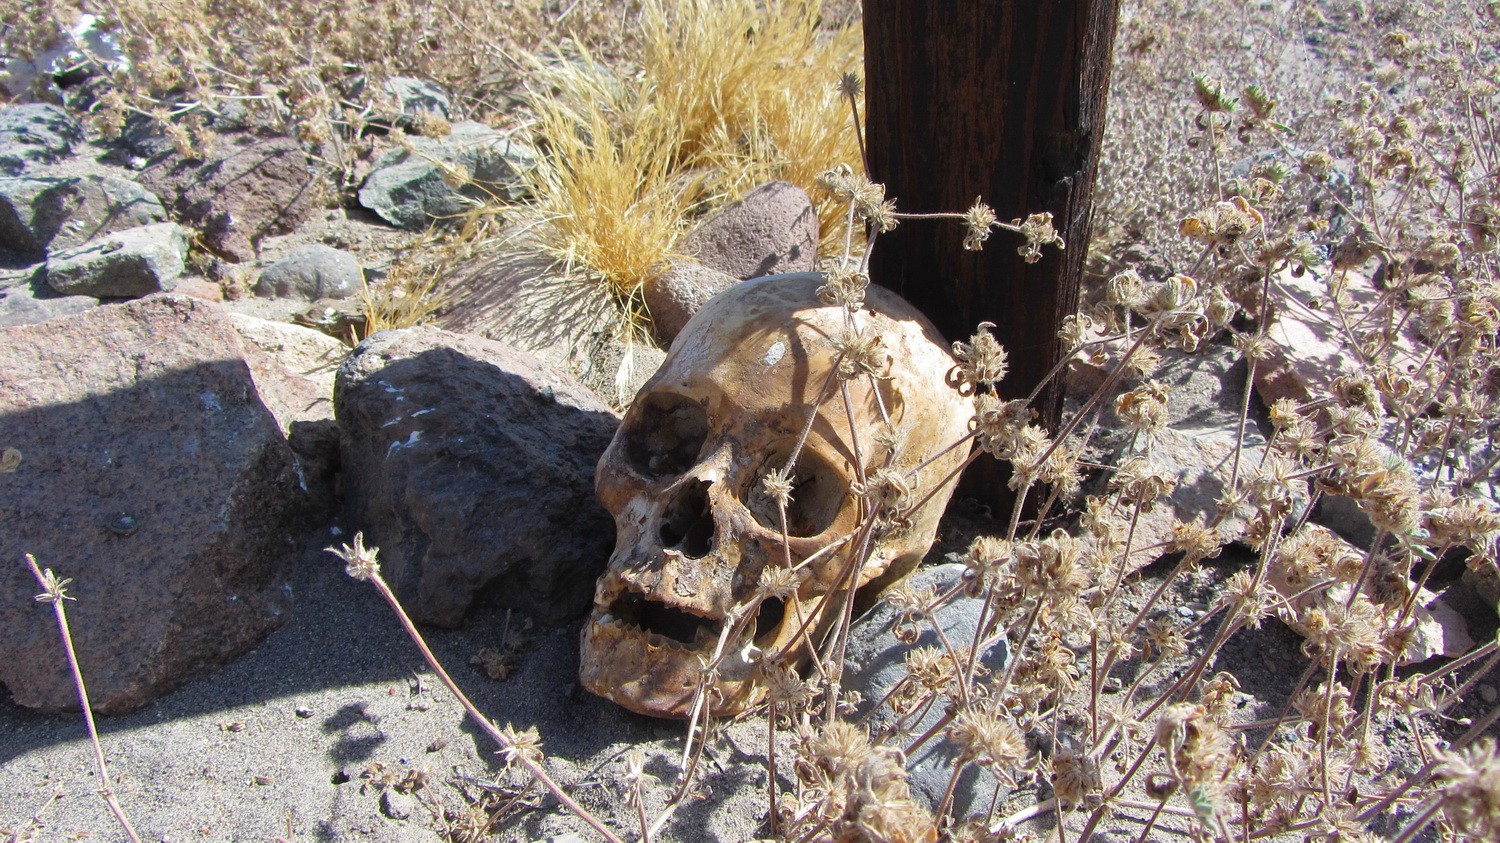 Grave with skull in Uchumayo